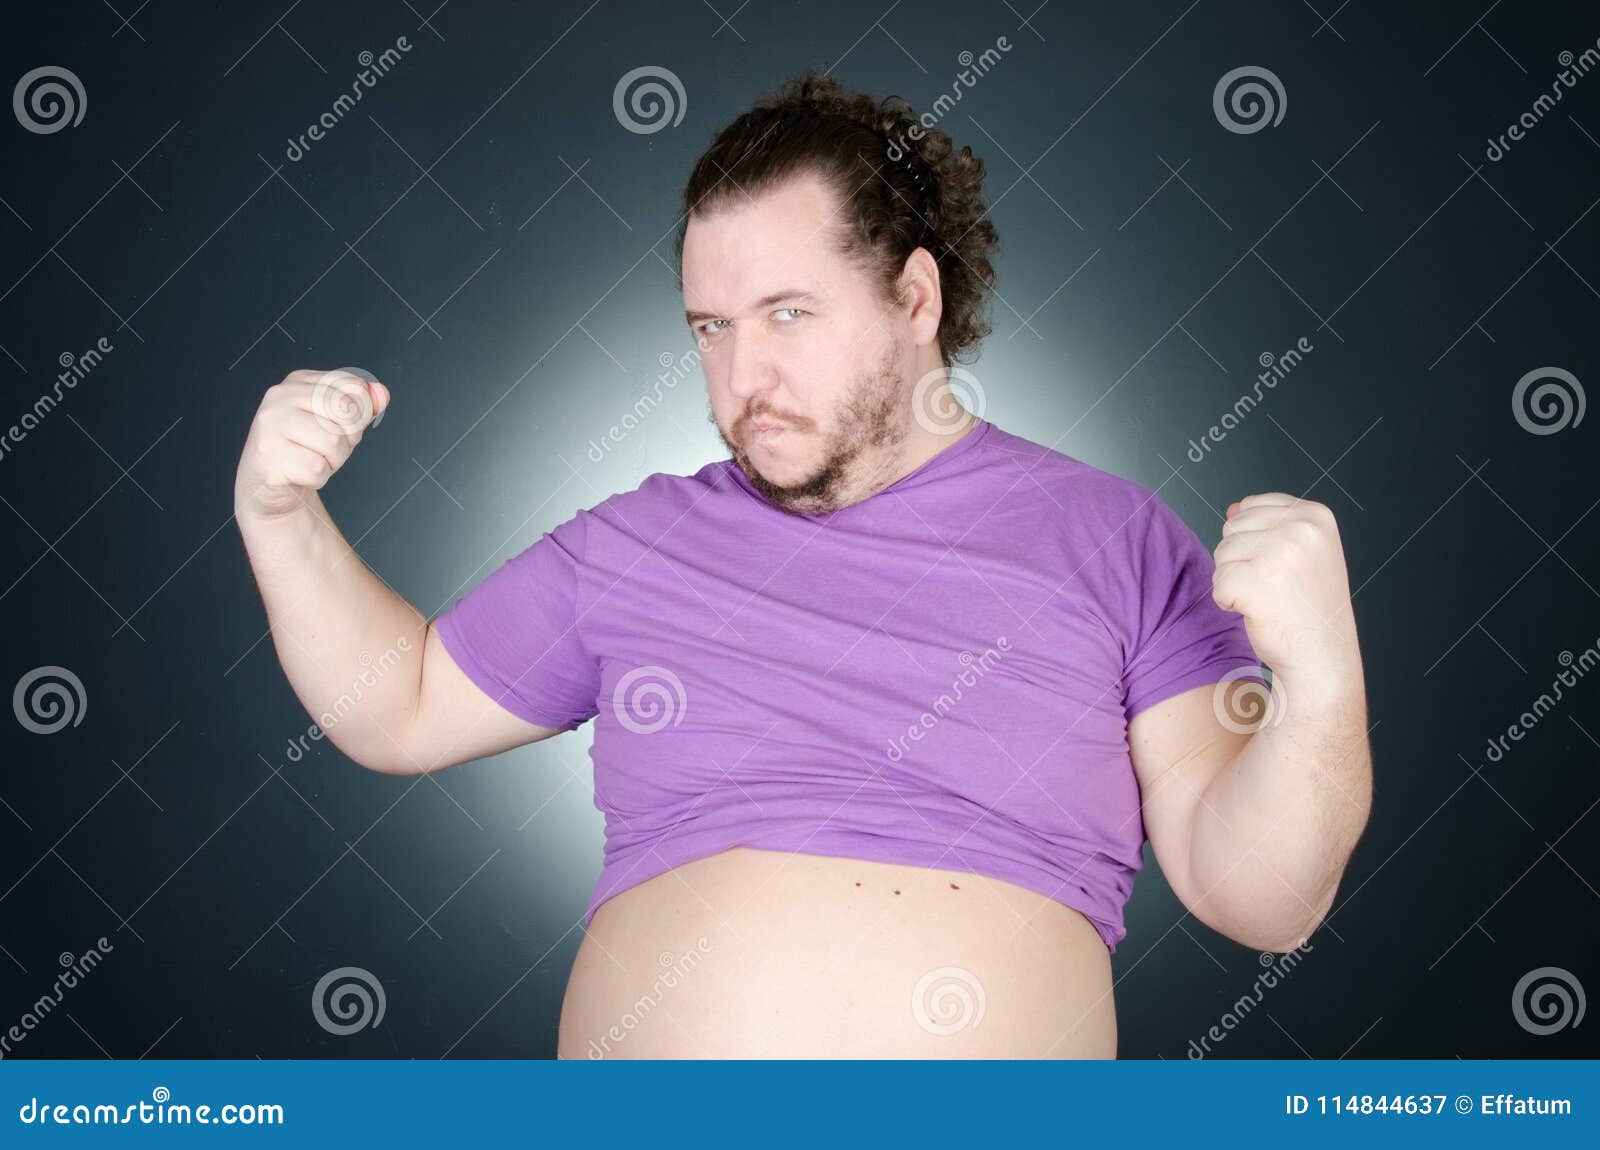 Funny Fat Guy with a Big Belly Stock Image - Image of fatty, dreams:  114844637